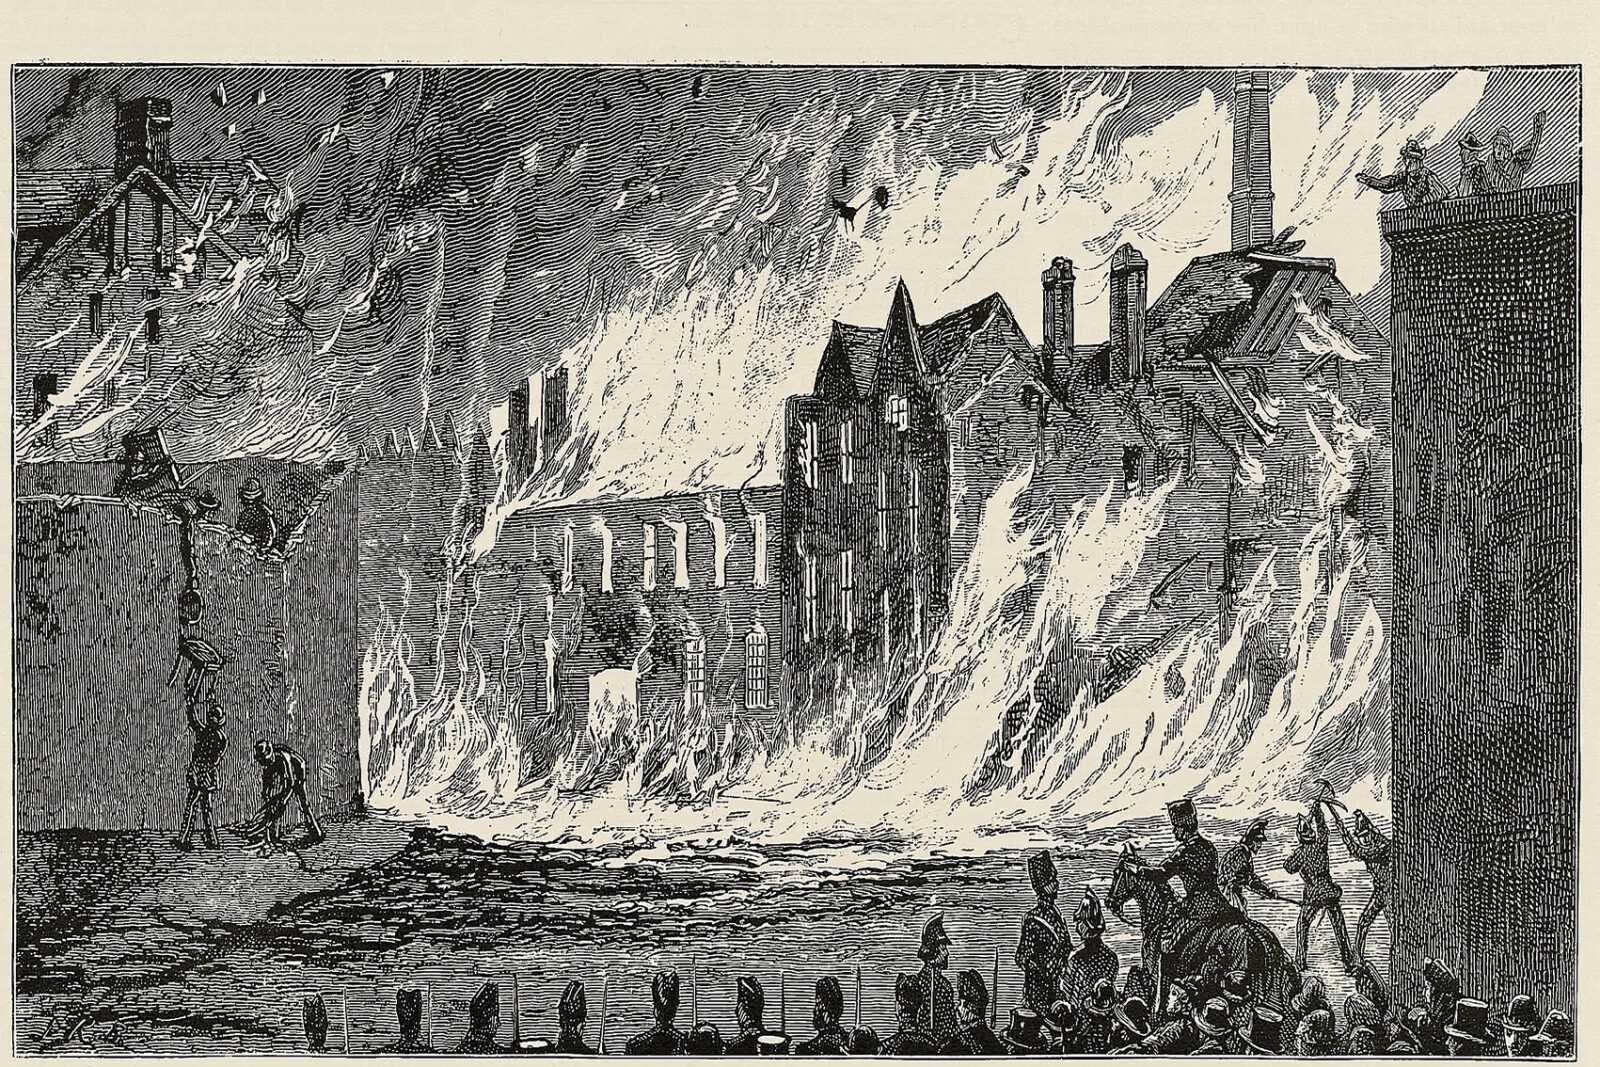 The Dublin Whiskey Fire of 1985, also known as The Great Liberties Whiskey Fire of 1875 took place on June 18 that year, resulting in the loss of 13 lives and over €6 million worth of damage in whiskey alone.